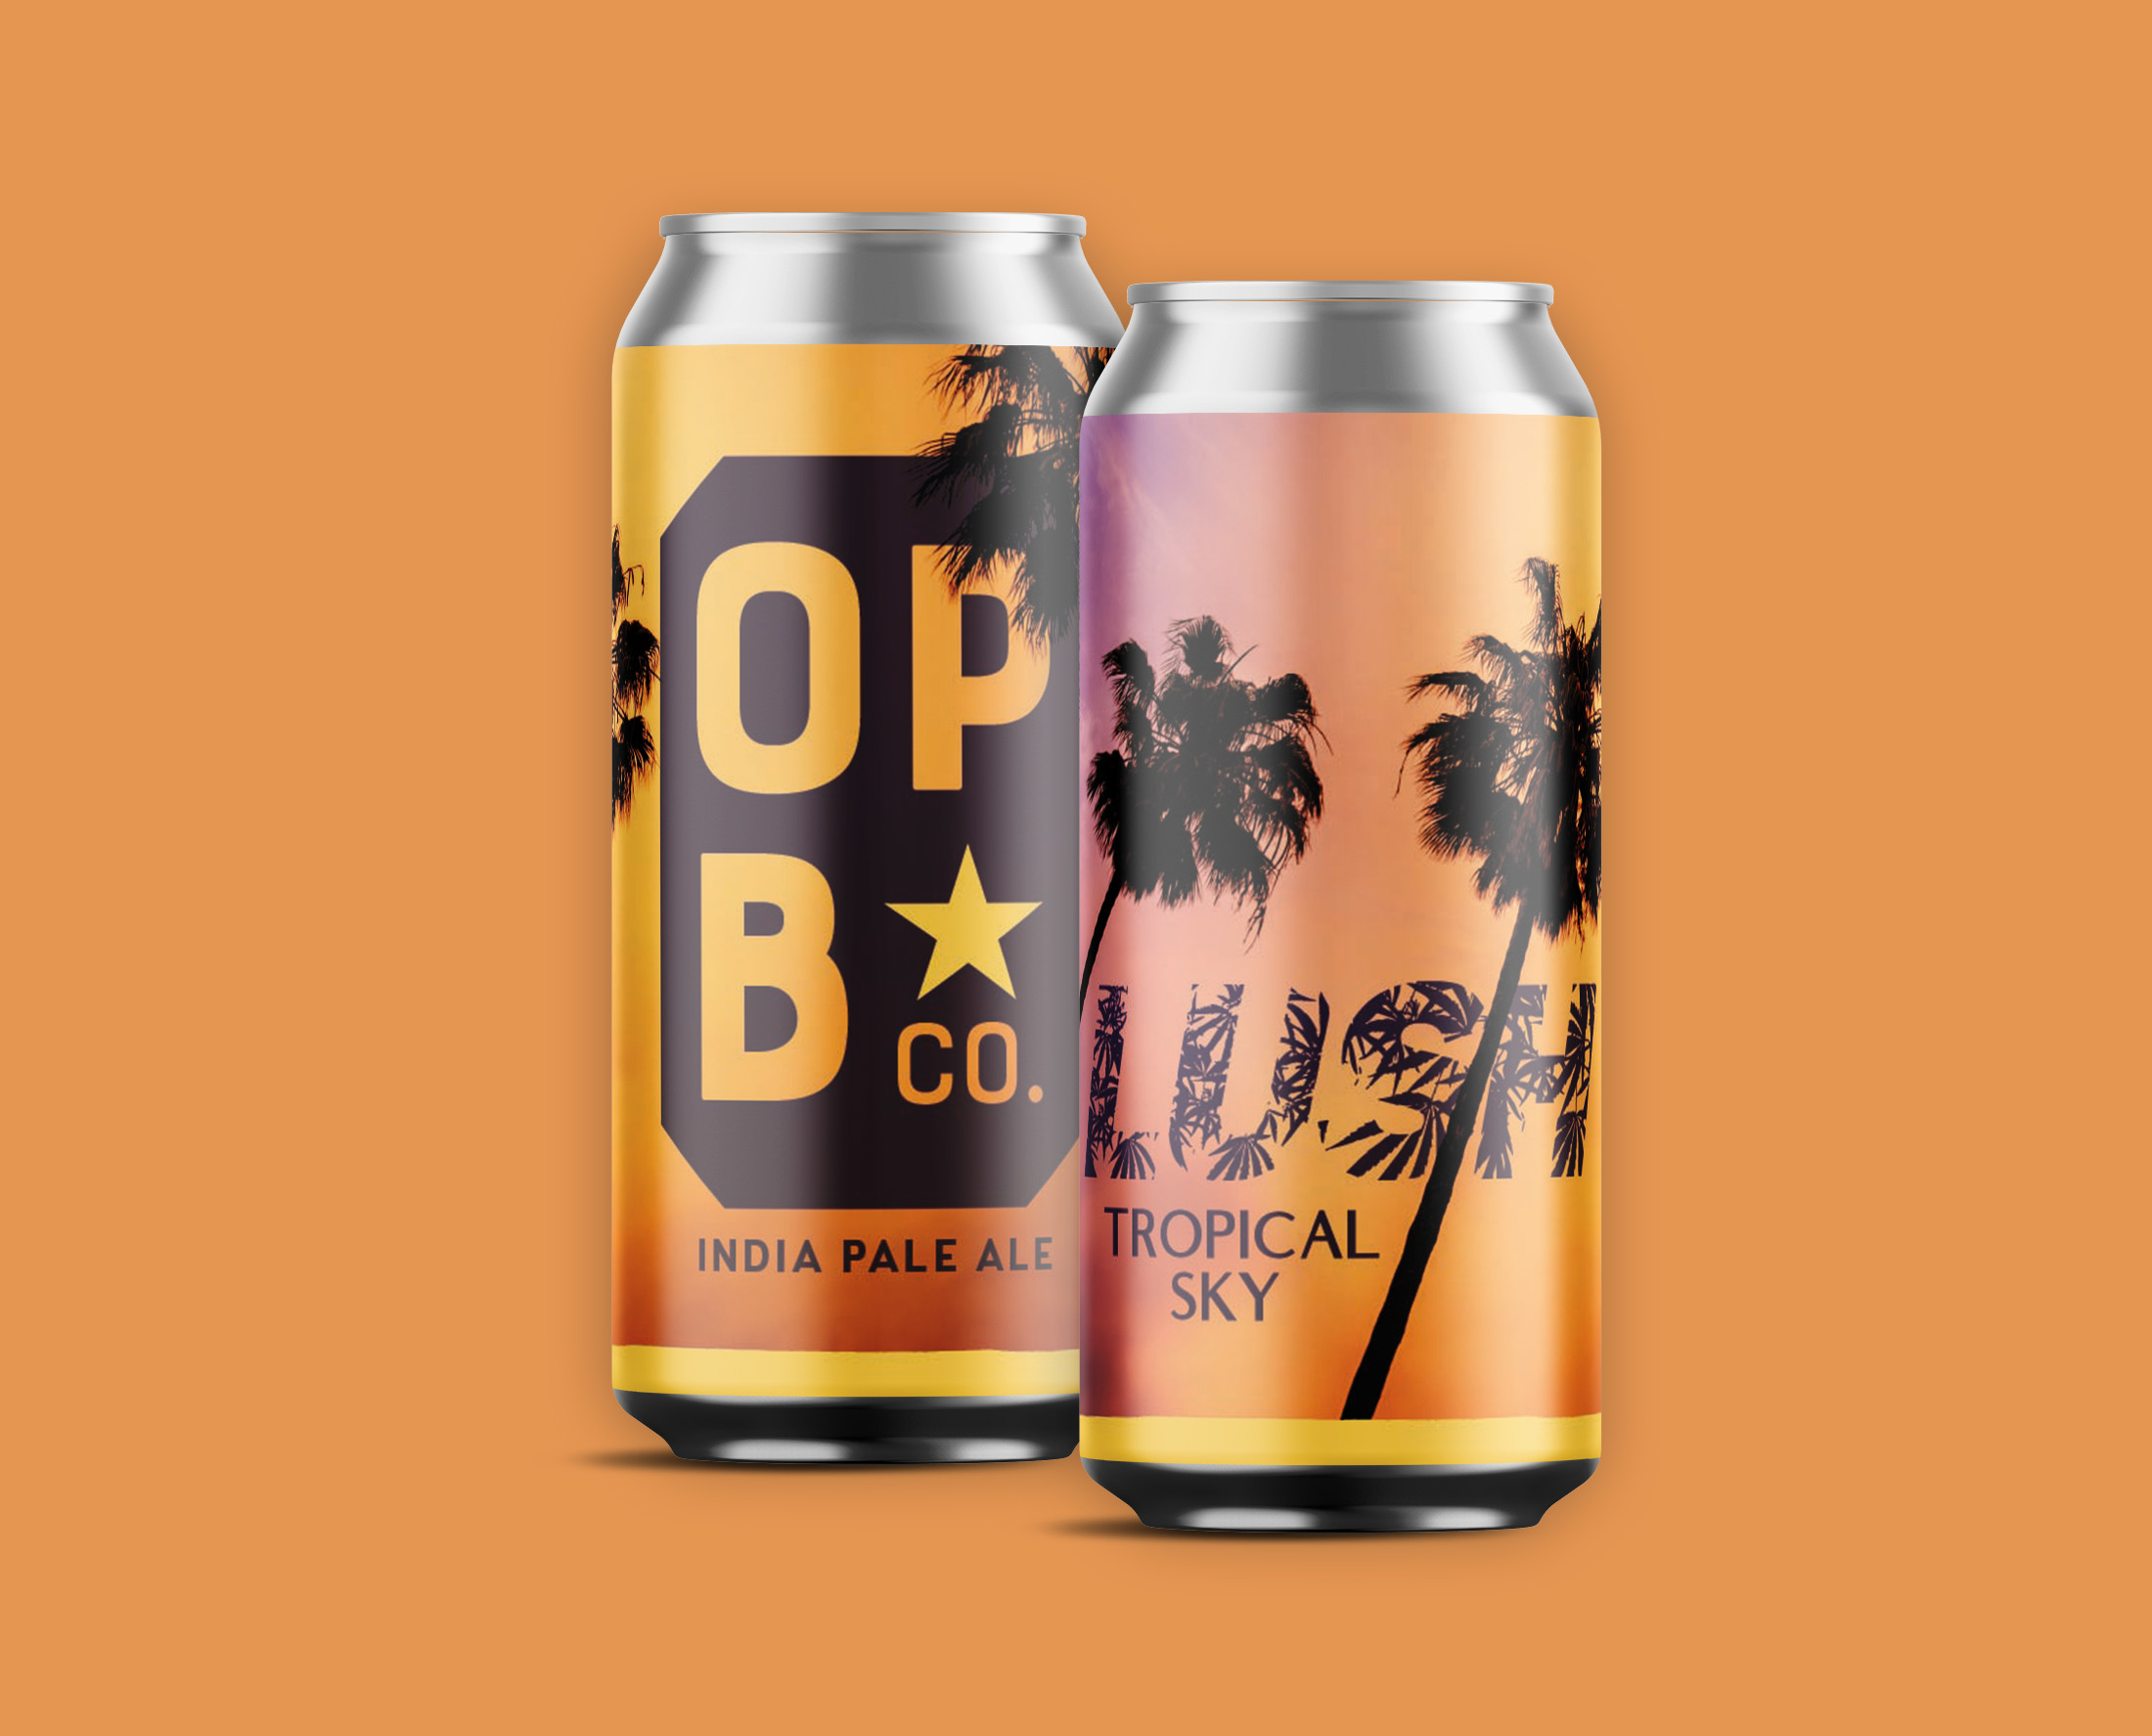 Digital rendering of, The Lush tropical sky IPA, Palm trees on 2 cans.